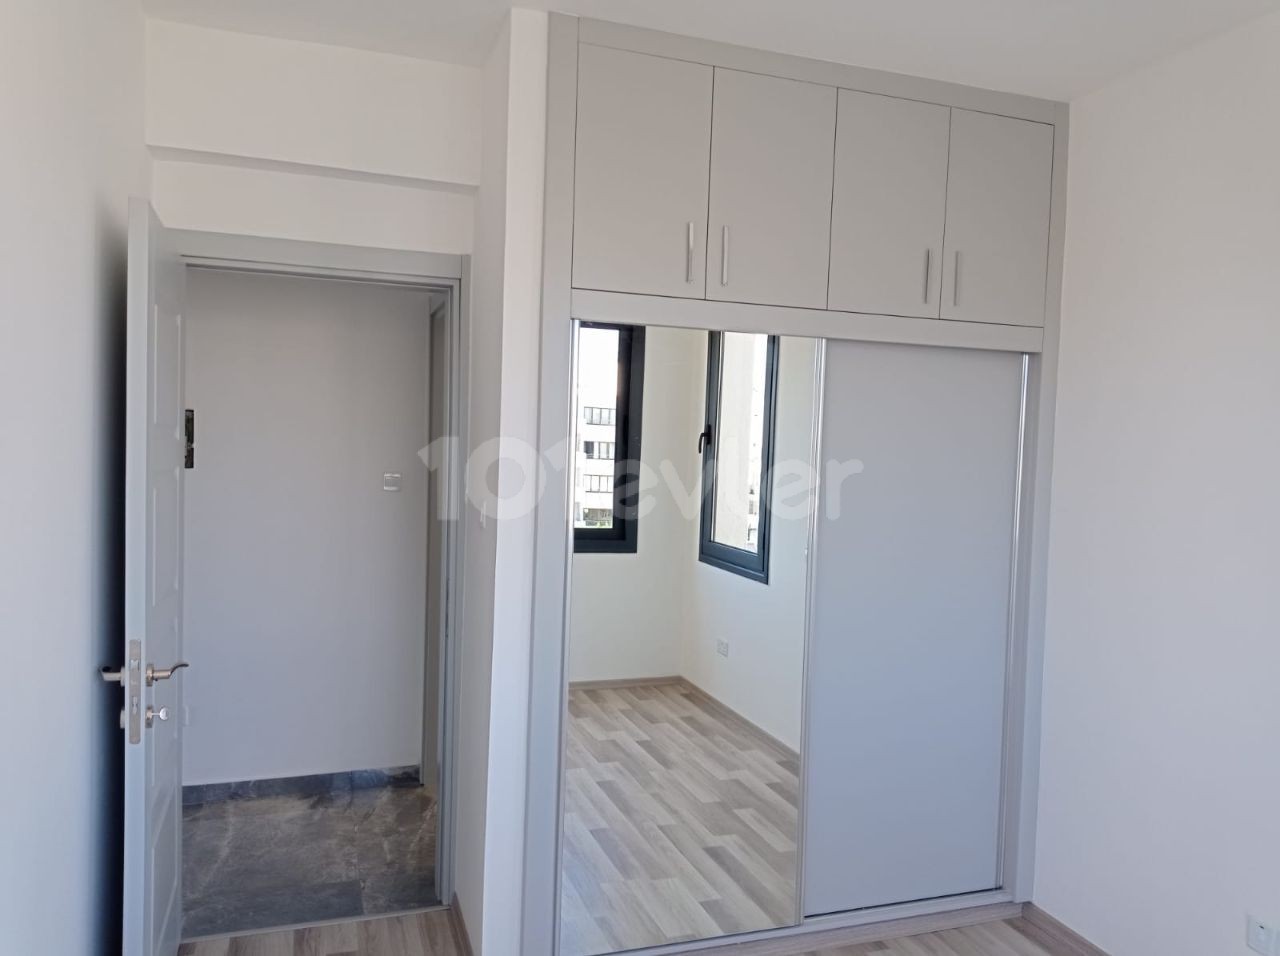 EXCELLENT DESIGN IN THE MOST ELITE AREA OF KÜÇÜK KAYMAKLI, 1. SPACIOUS AND SPACIOUS APARTMENTS WITH AN ELEVATOR (3+1), BUILT WITH HIGH-CLASS WORKMANSHIP AND MATERIALS ** 